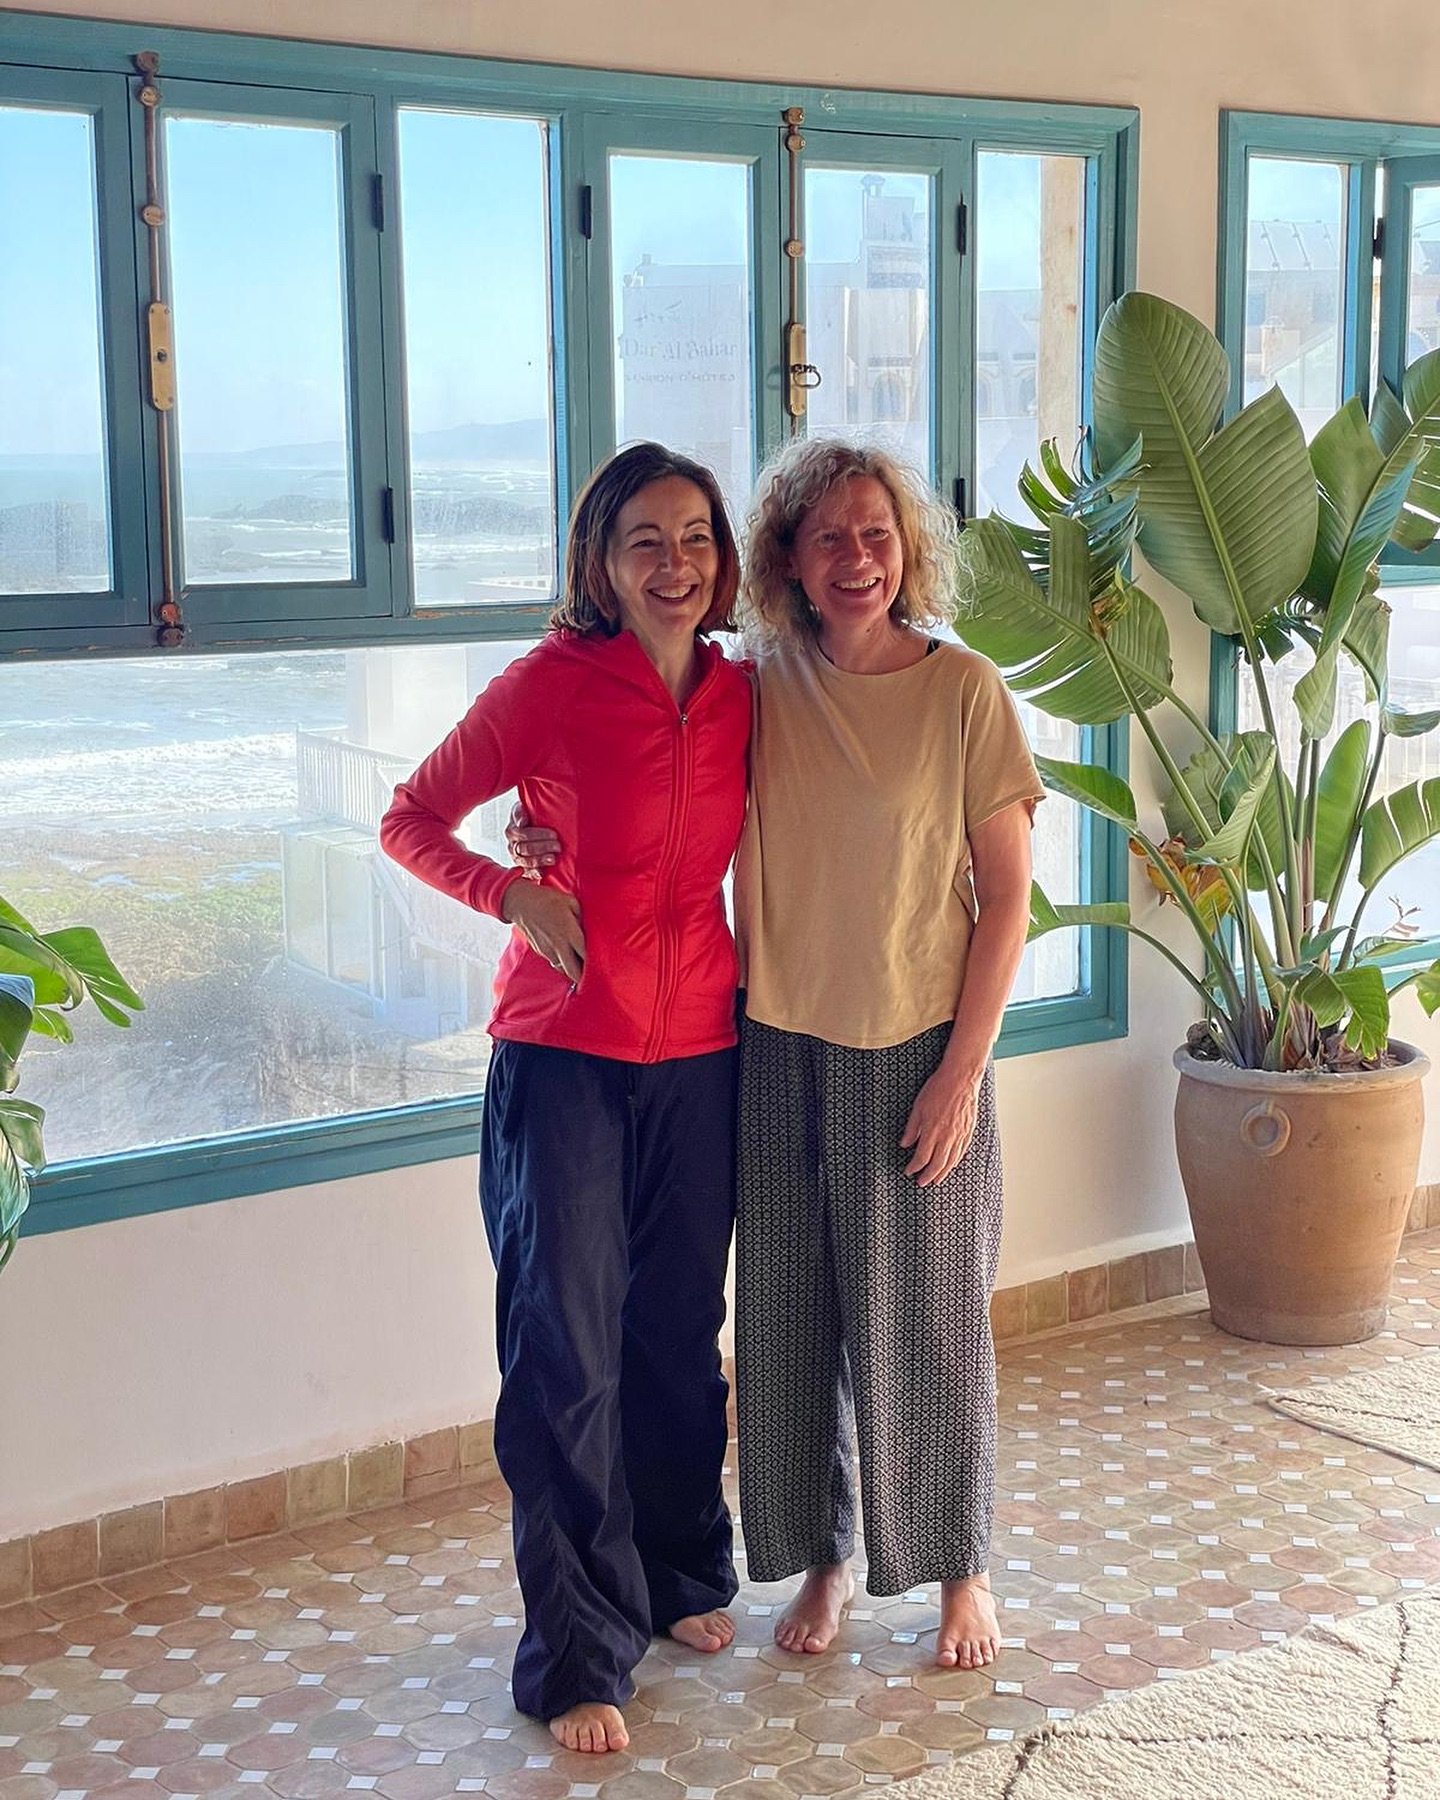 Just landing from a magical time in Morocco 🇲🇦 

Big thanks to @ceciliecia and @vibekekl who came all the way from Oslo to take this lovely photo of Rebecca and I getting ready to host the group in@the rooftop studio overlooking the sea. 

They als